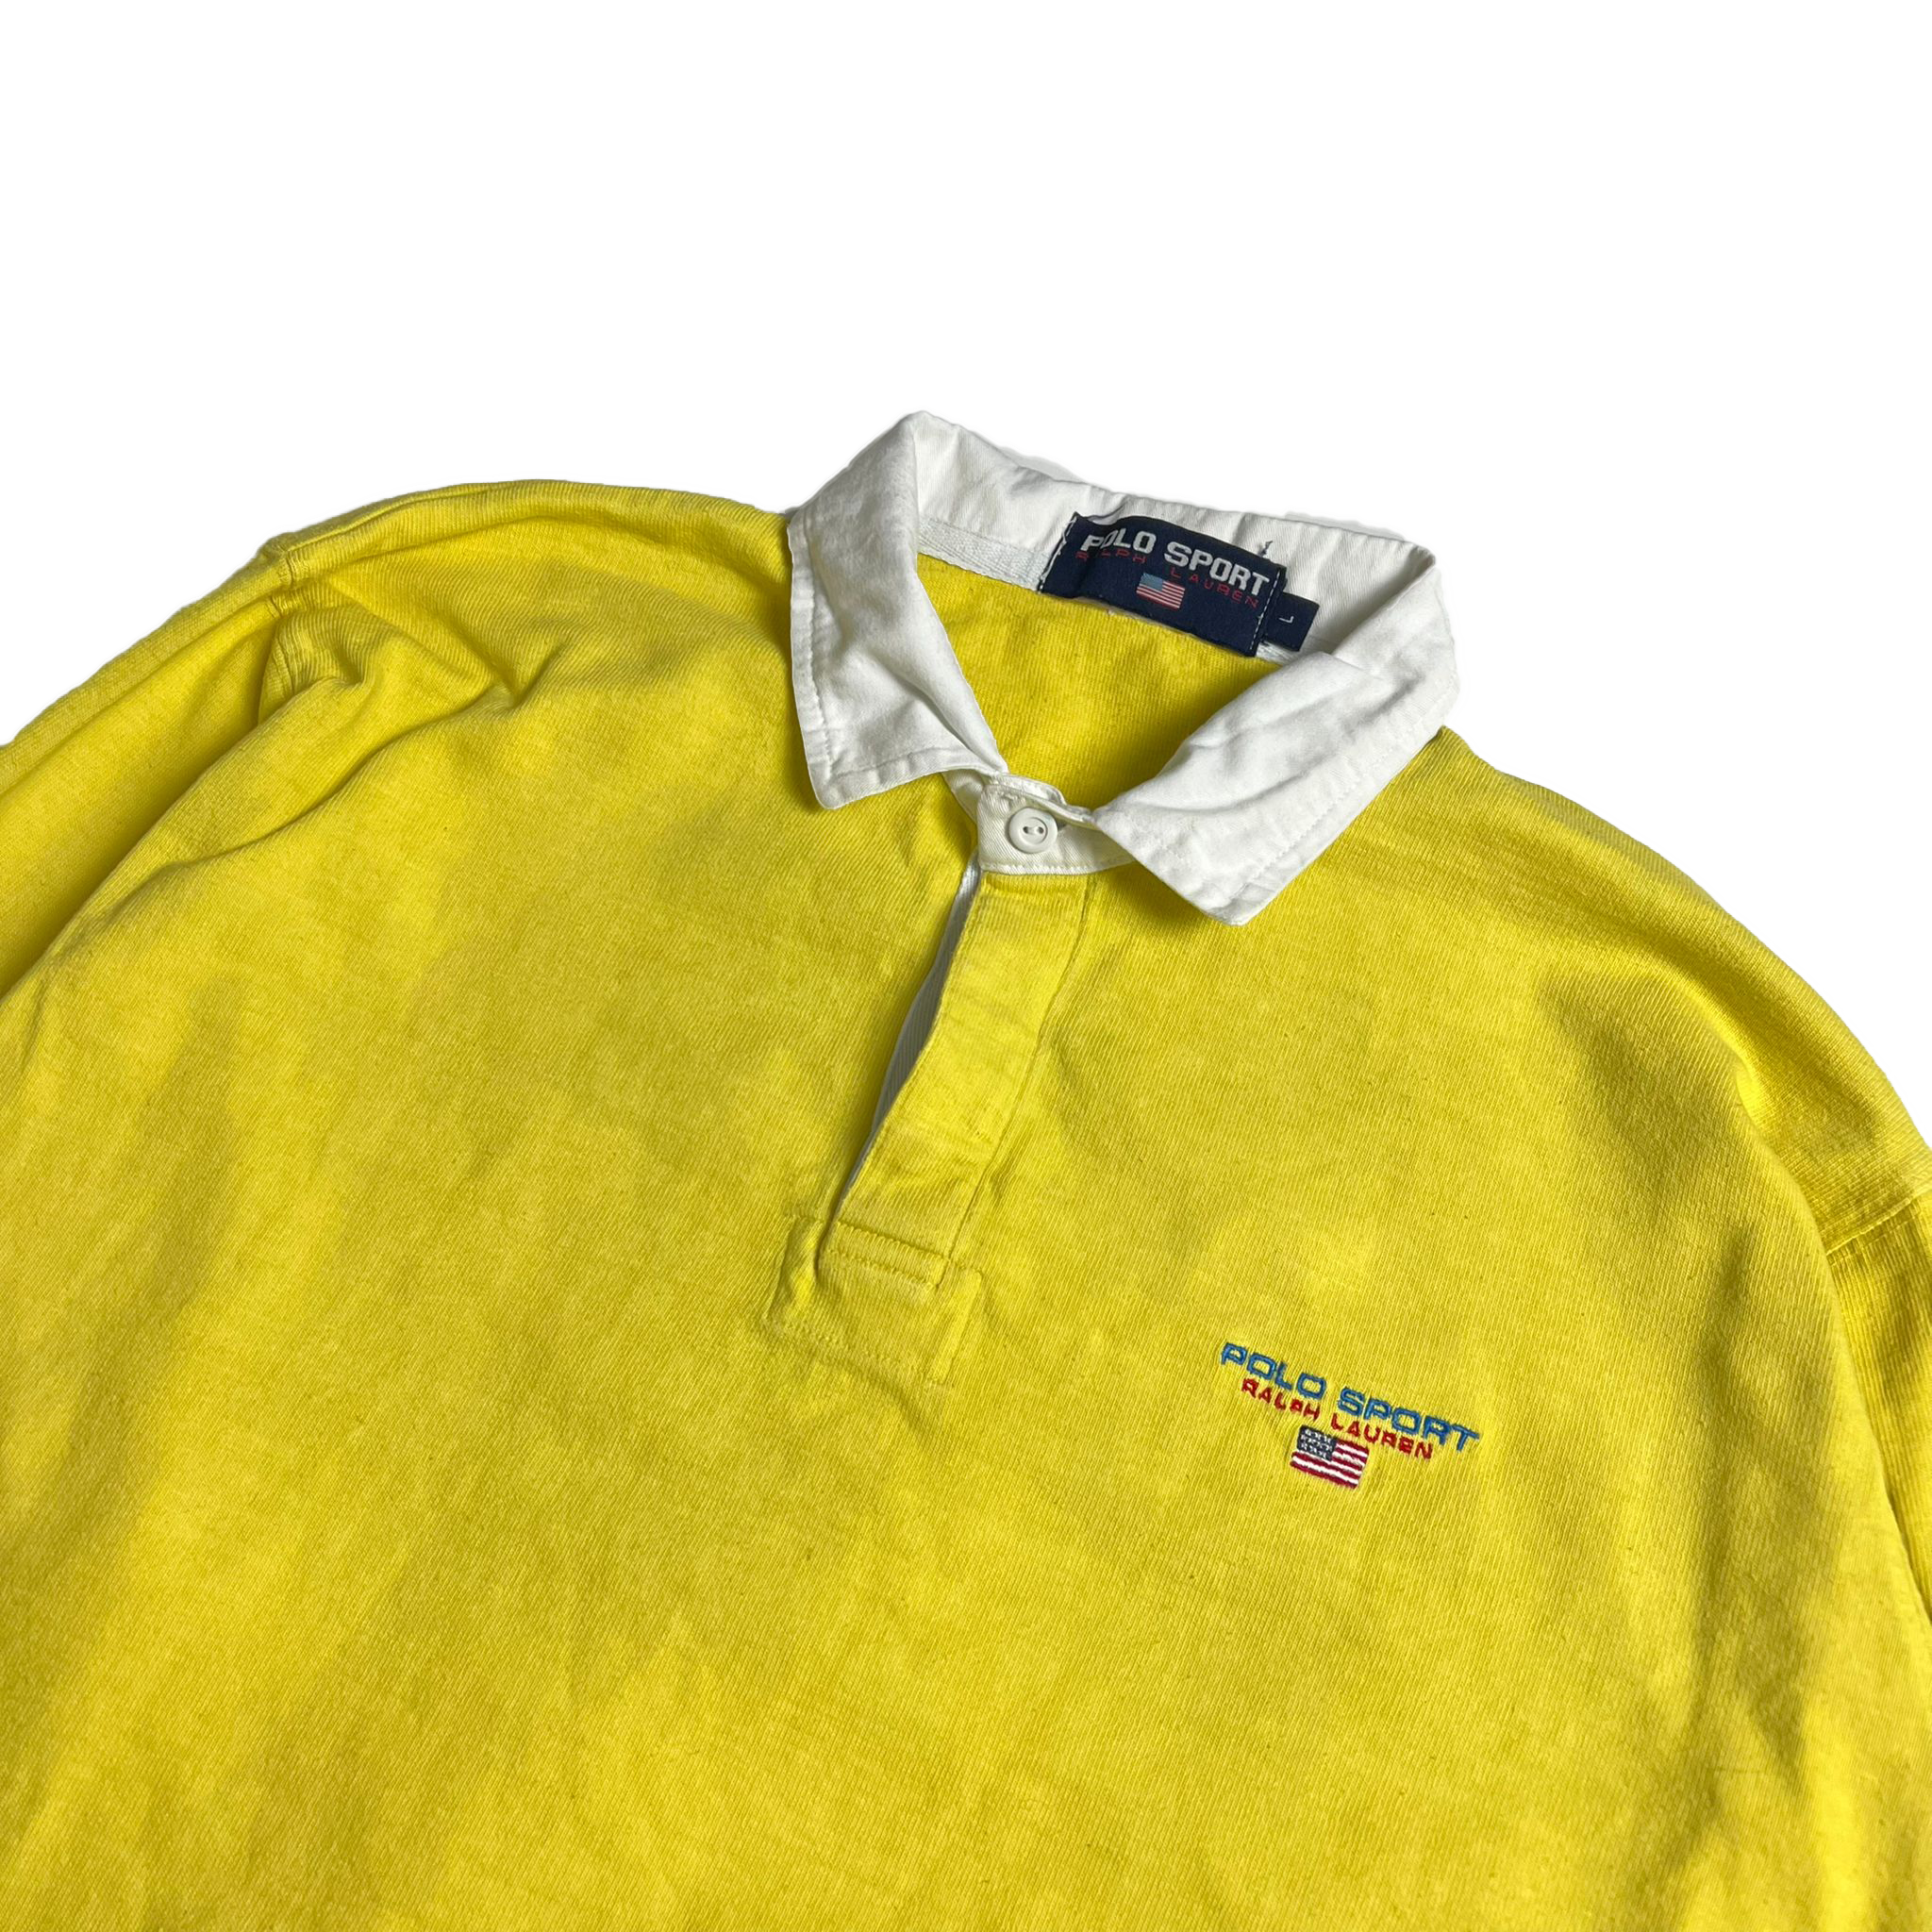 90's Polo Sport rugby shirt